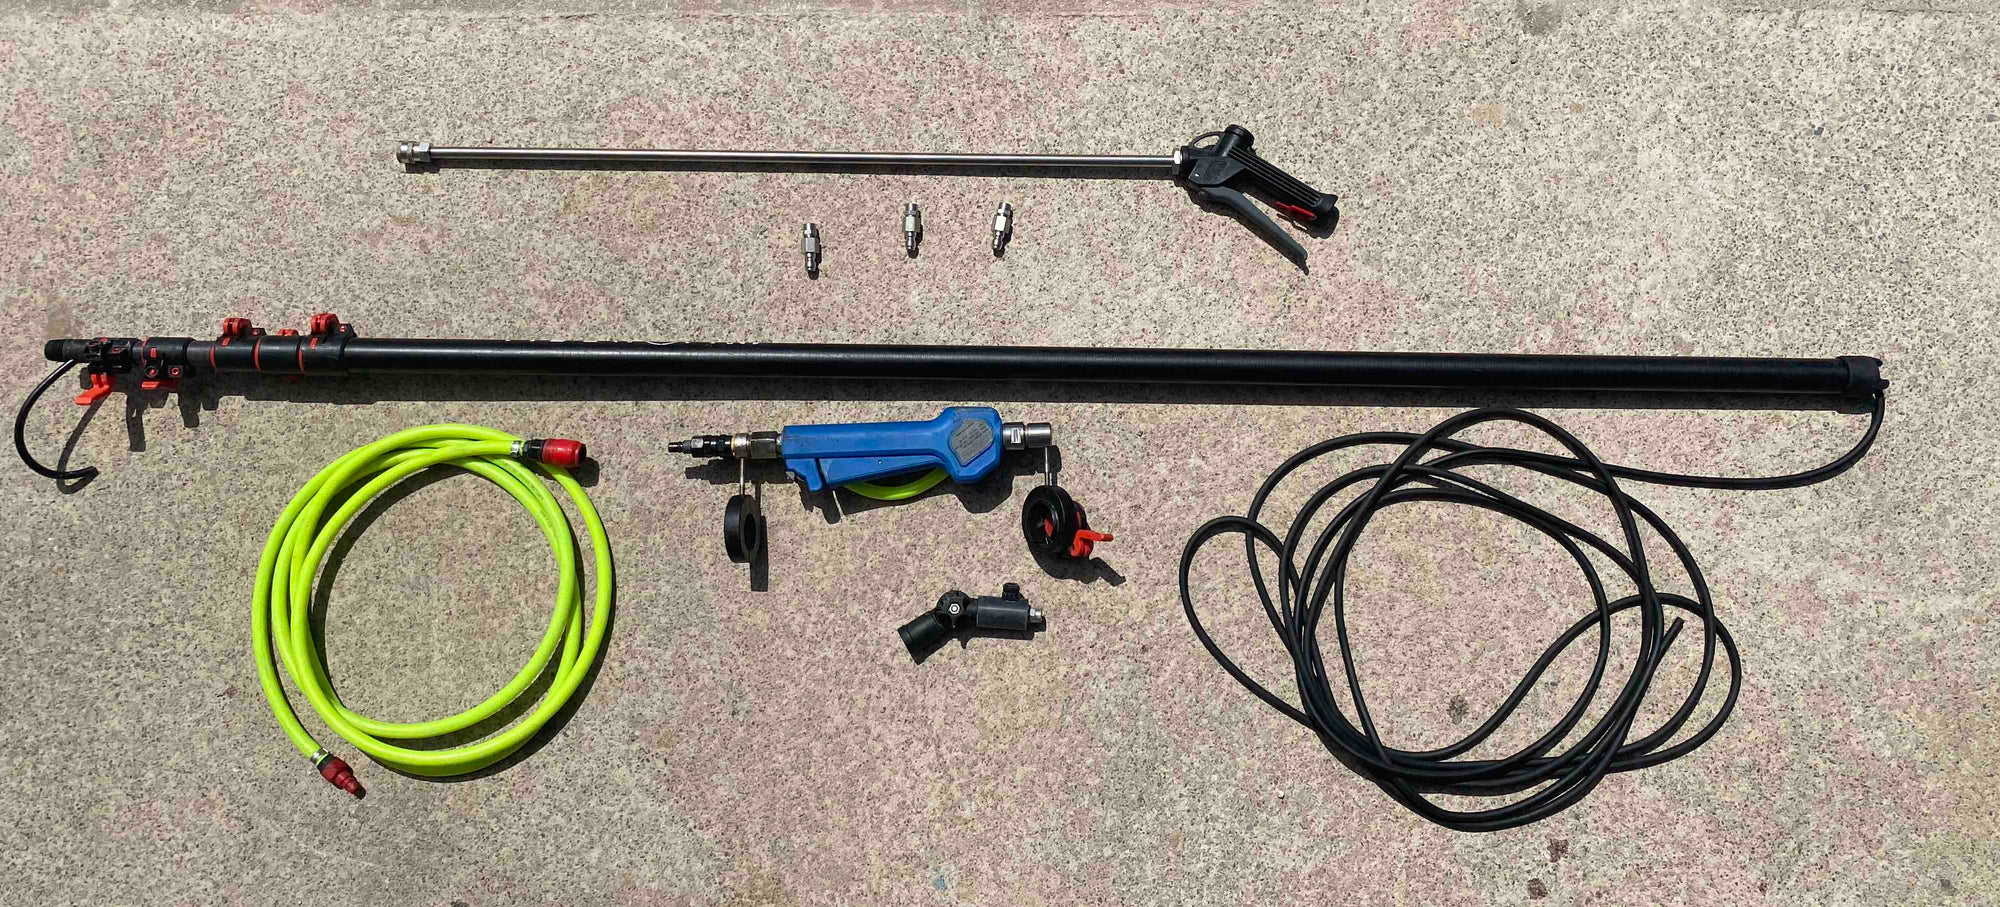 BENZ SOFT WASH CHEMICAL APPLICATION SYSTEM: Carbon pole, LP350 trigger, low level lance, spray nozzles and fittings bundle